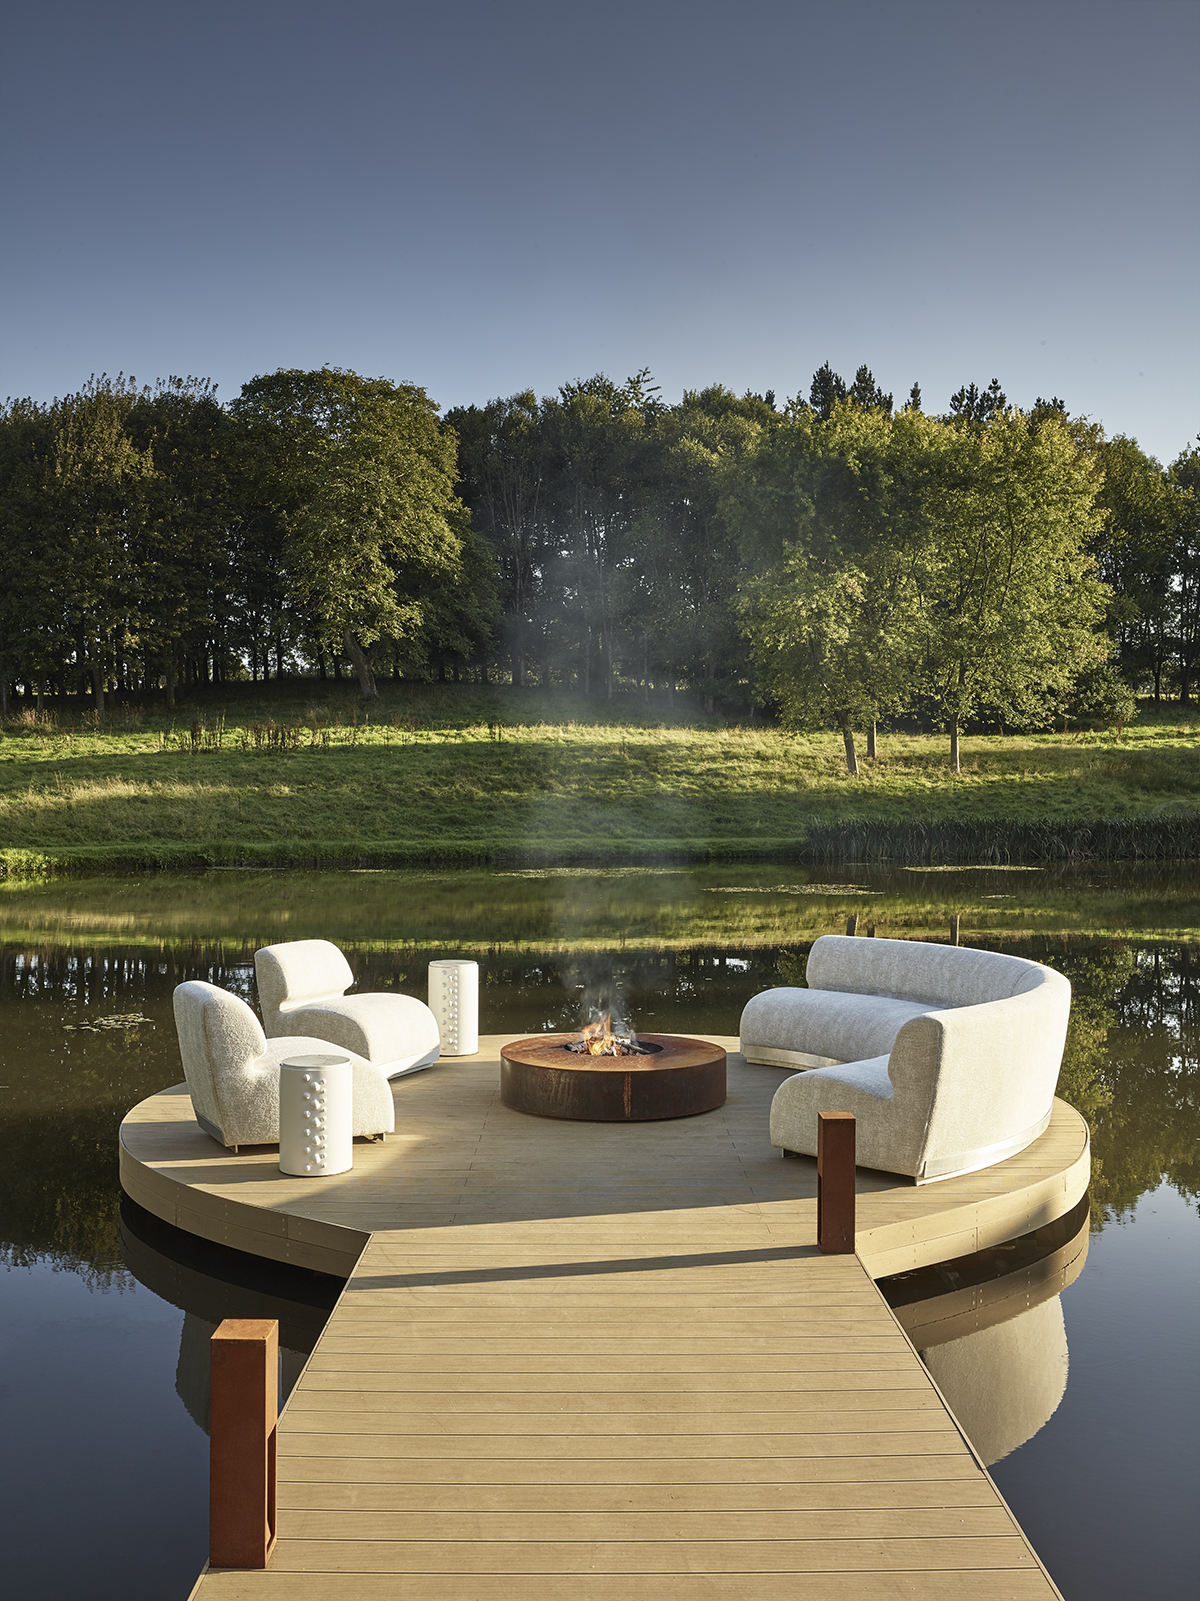 a deck on a lake with a fire and sofas in a circle at the end